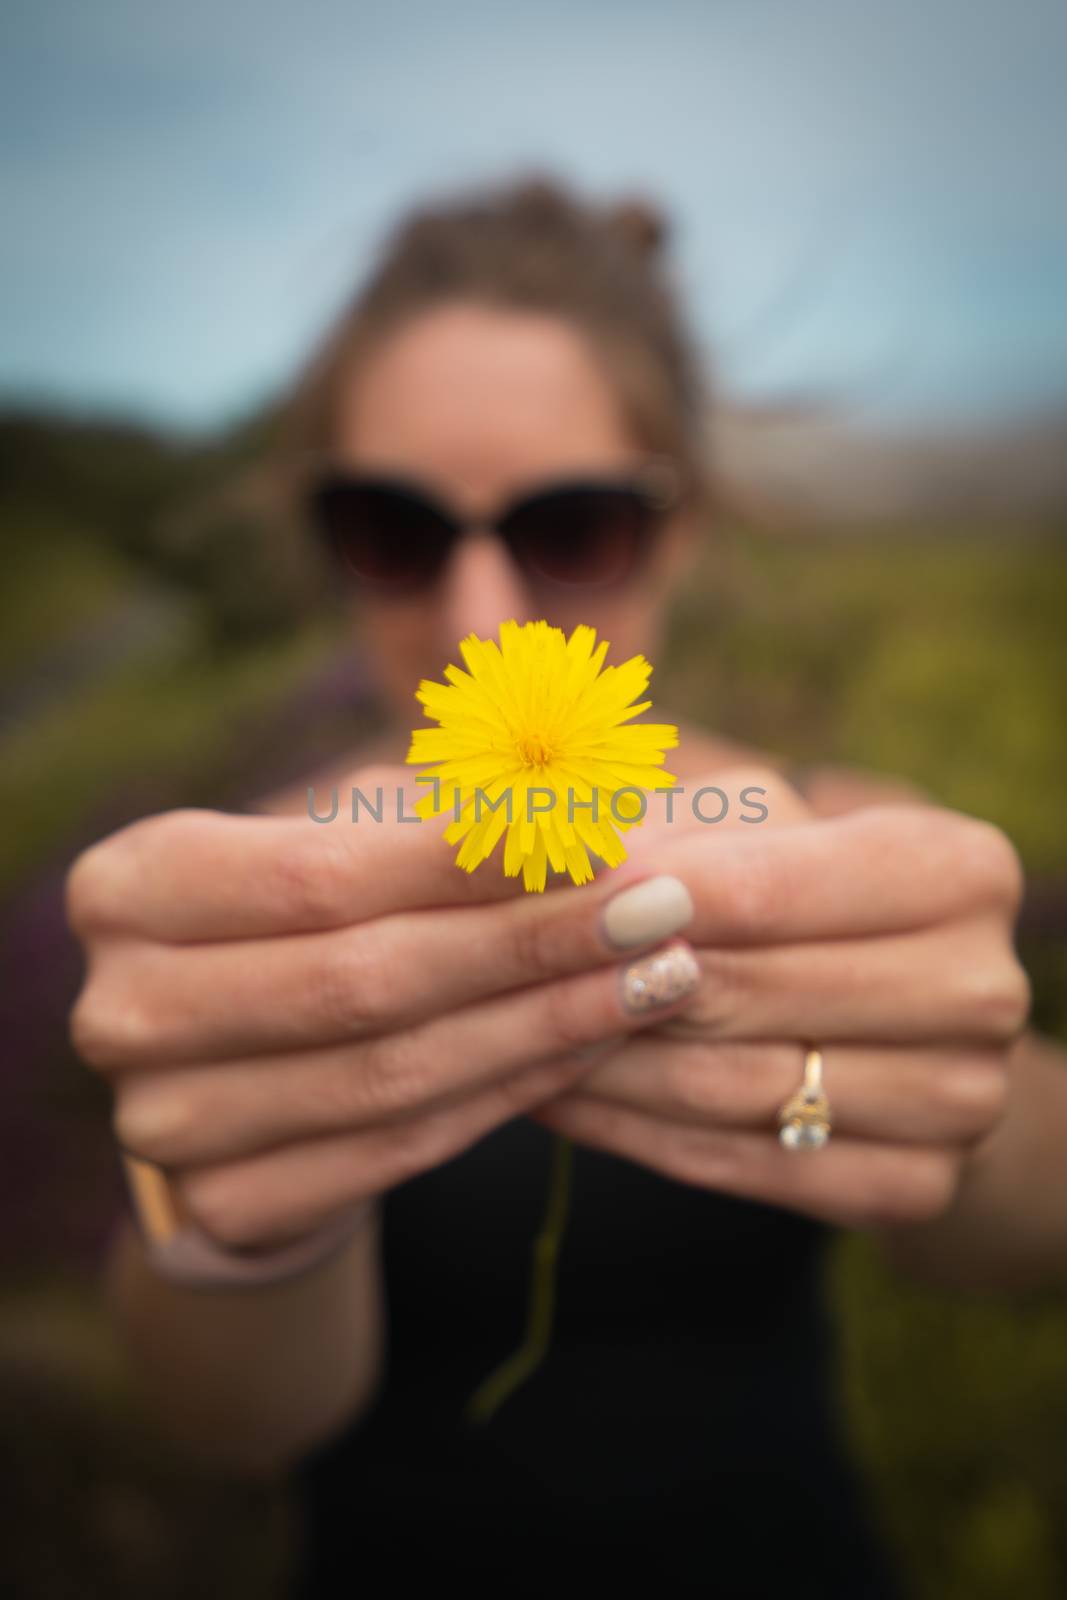 A portrait of a woman holding a yellow dandelion flower close up